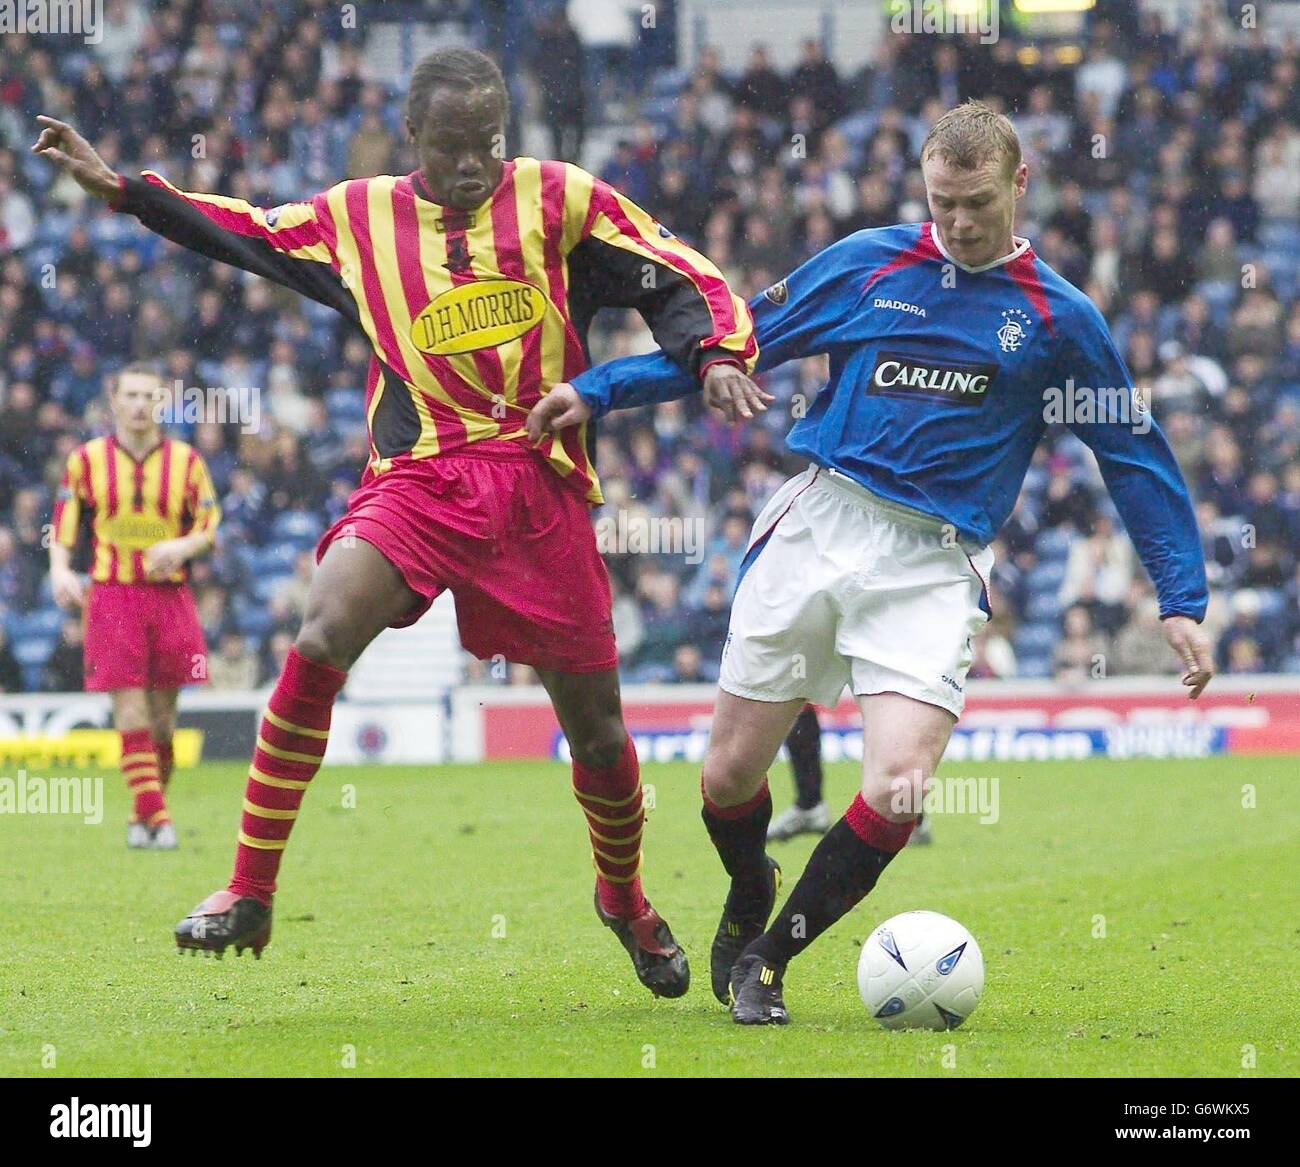 Rangers' Michael Ball (right) in action against Partick Thistle's Jean Yves Anis during their Bank of Scotland Premier League match Ibrox Park, Glasgow, Saturday 17th April 2004. EDITORIAL USE ONLY. Stock Photo